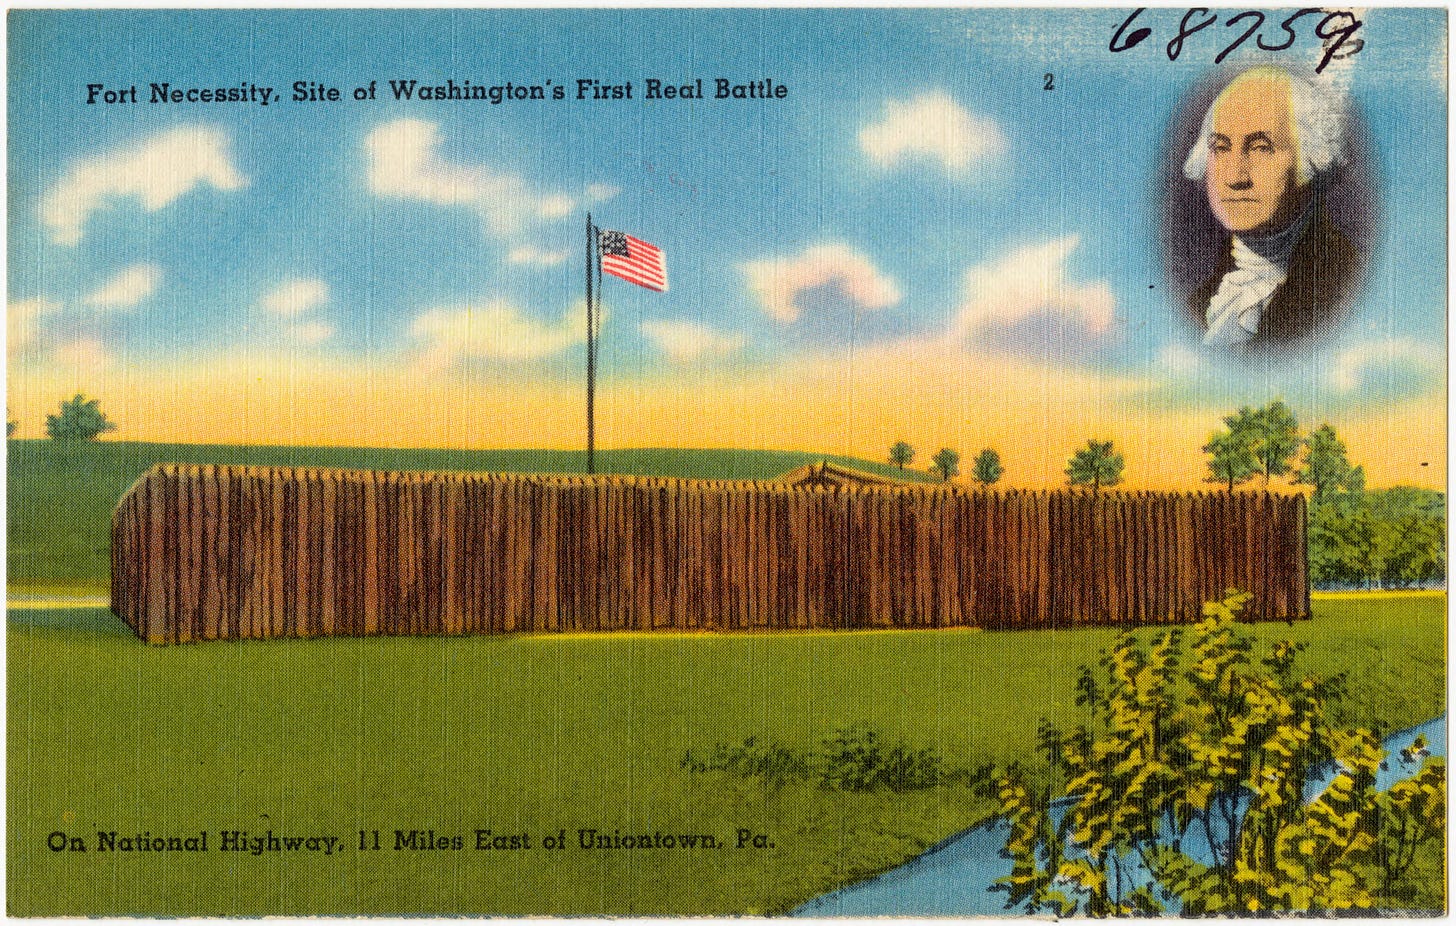 Post card depicting fort necessity with a flag flying. George Washington is depicted in the upper right hand corner.